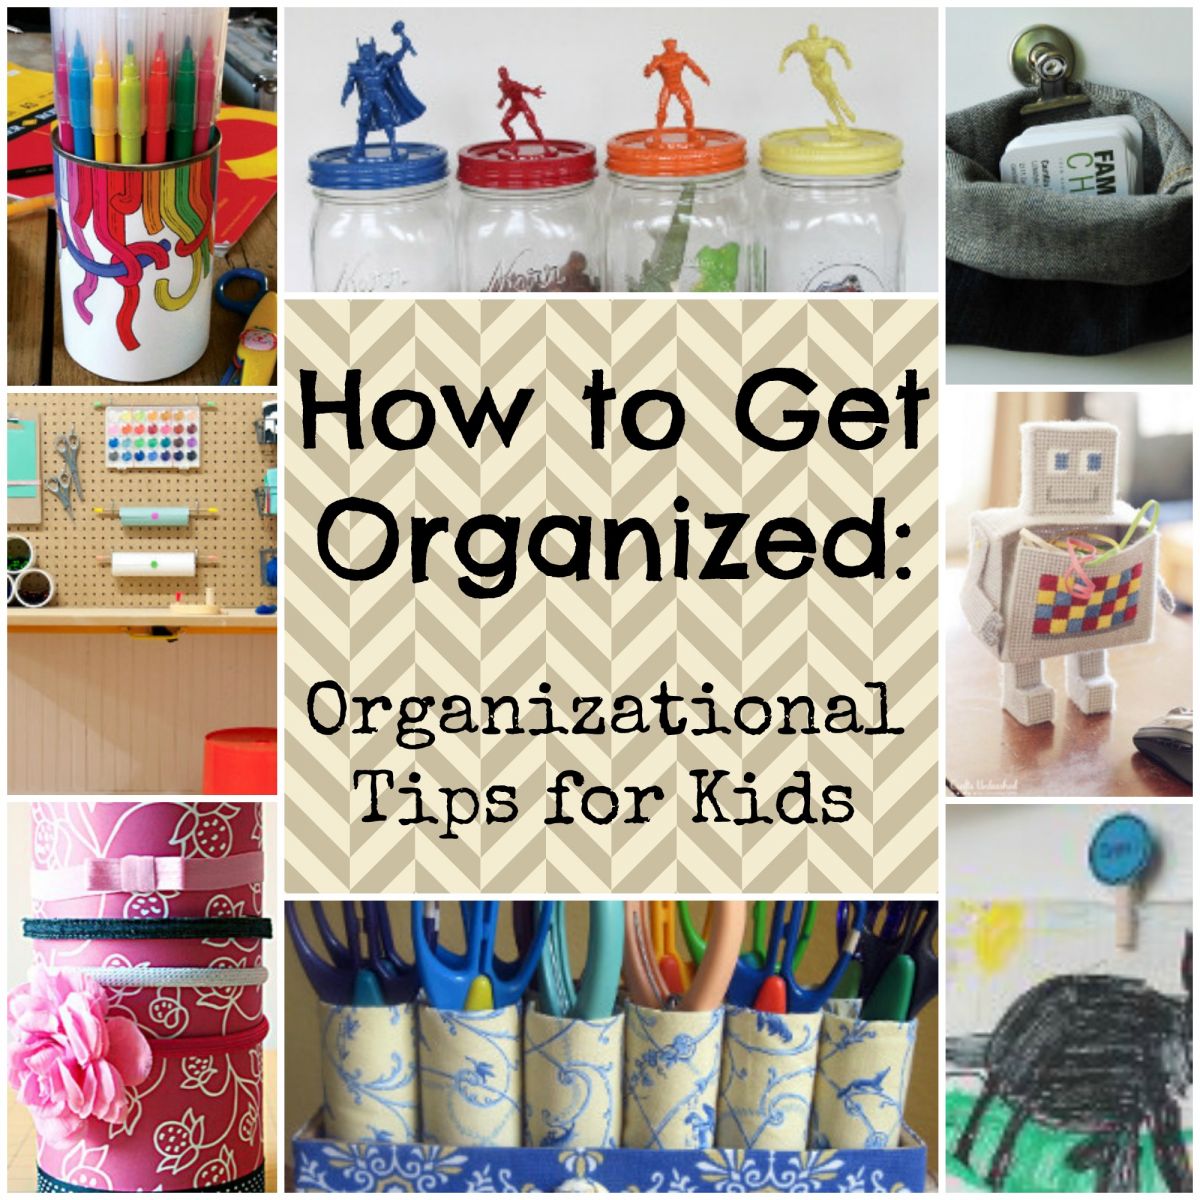 How to Get Organized: 19 Organizational Tips for Kids